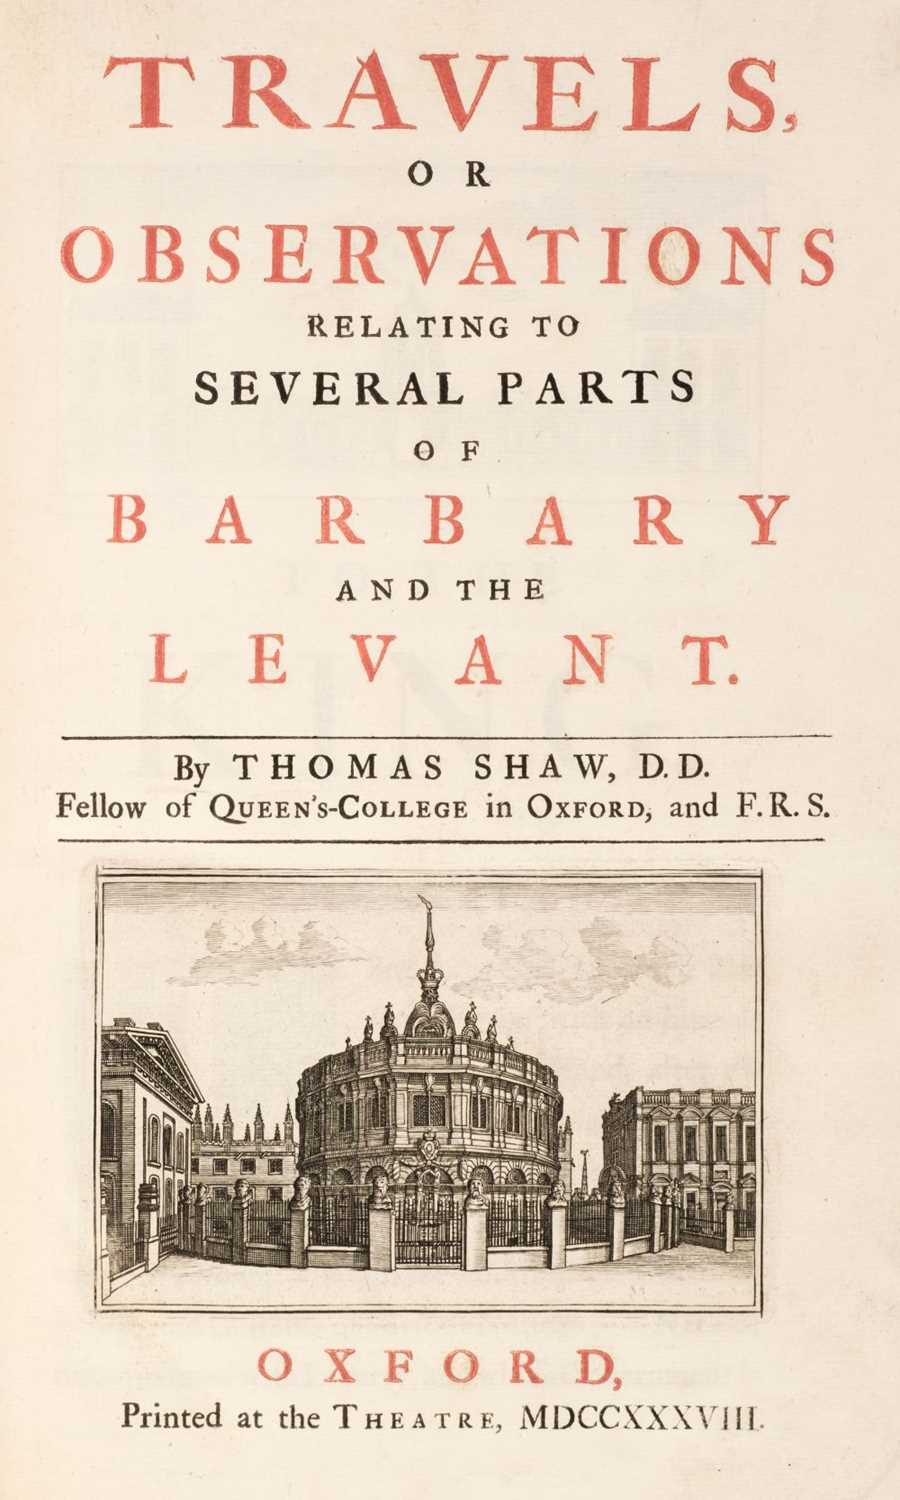 Lot 35 - Shaw (Thomas). Travels, or Observations relating to... Barbary and the Levant, 1st edition, 1738